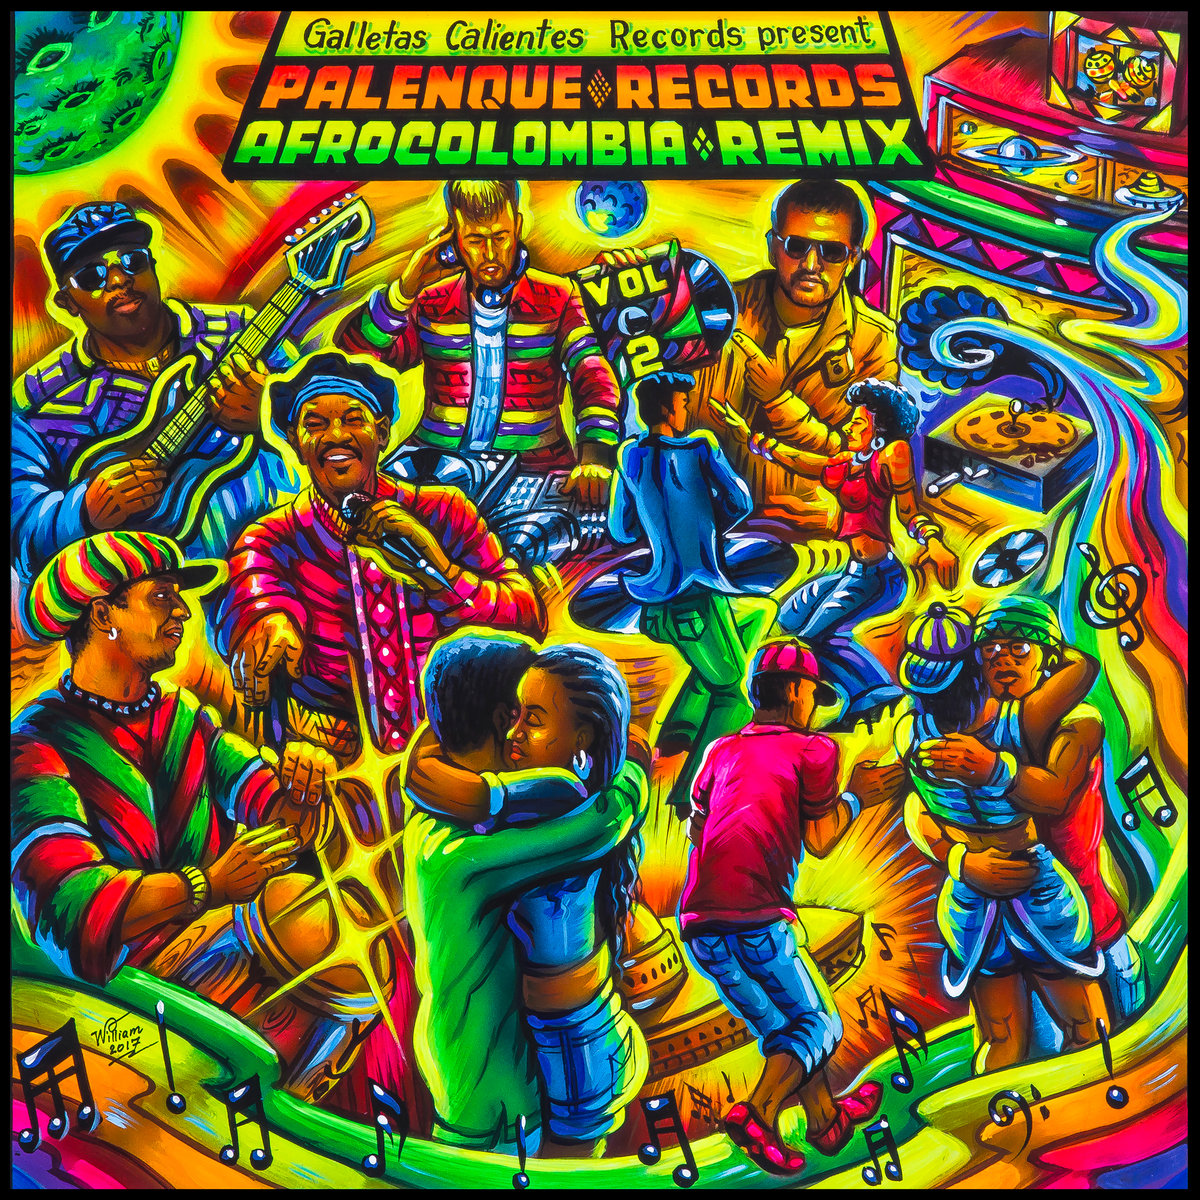 V.A. (PALENQUE RECORDS AFROCOLOMBIA REMIX) / オムニバス / PALENQUE RECORDS AFROCOLOMBIA REMIX VOL.2